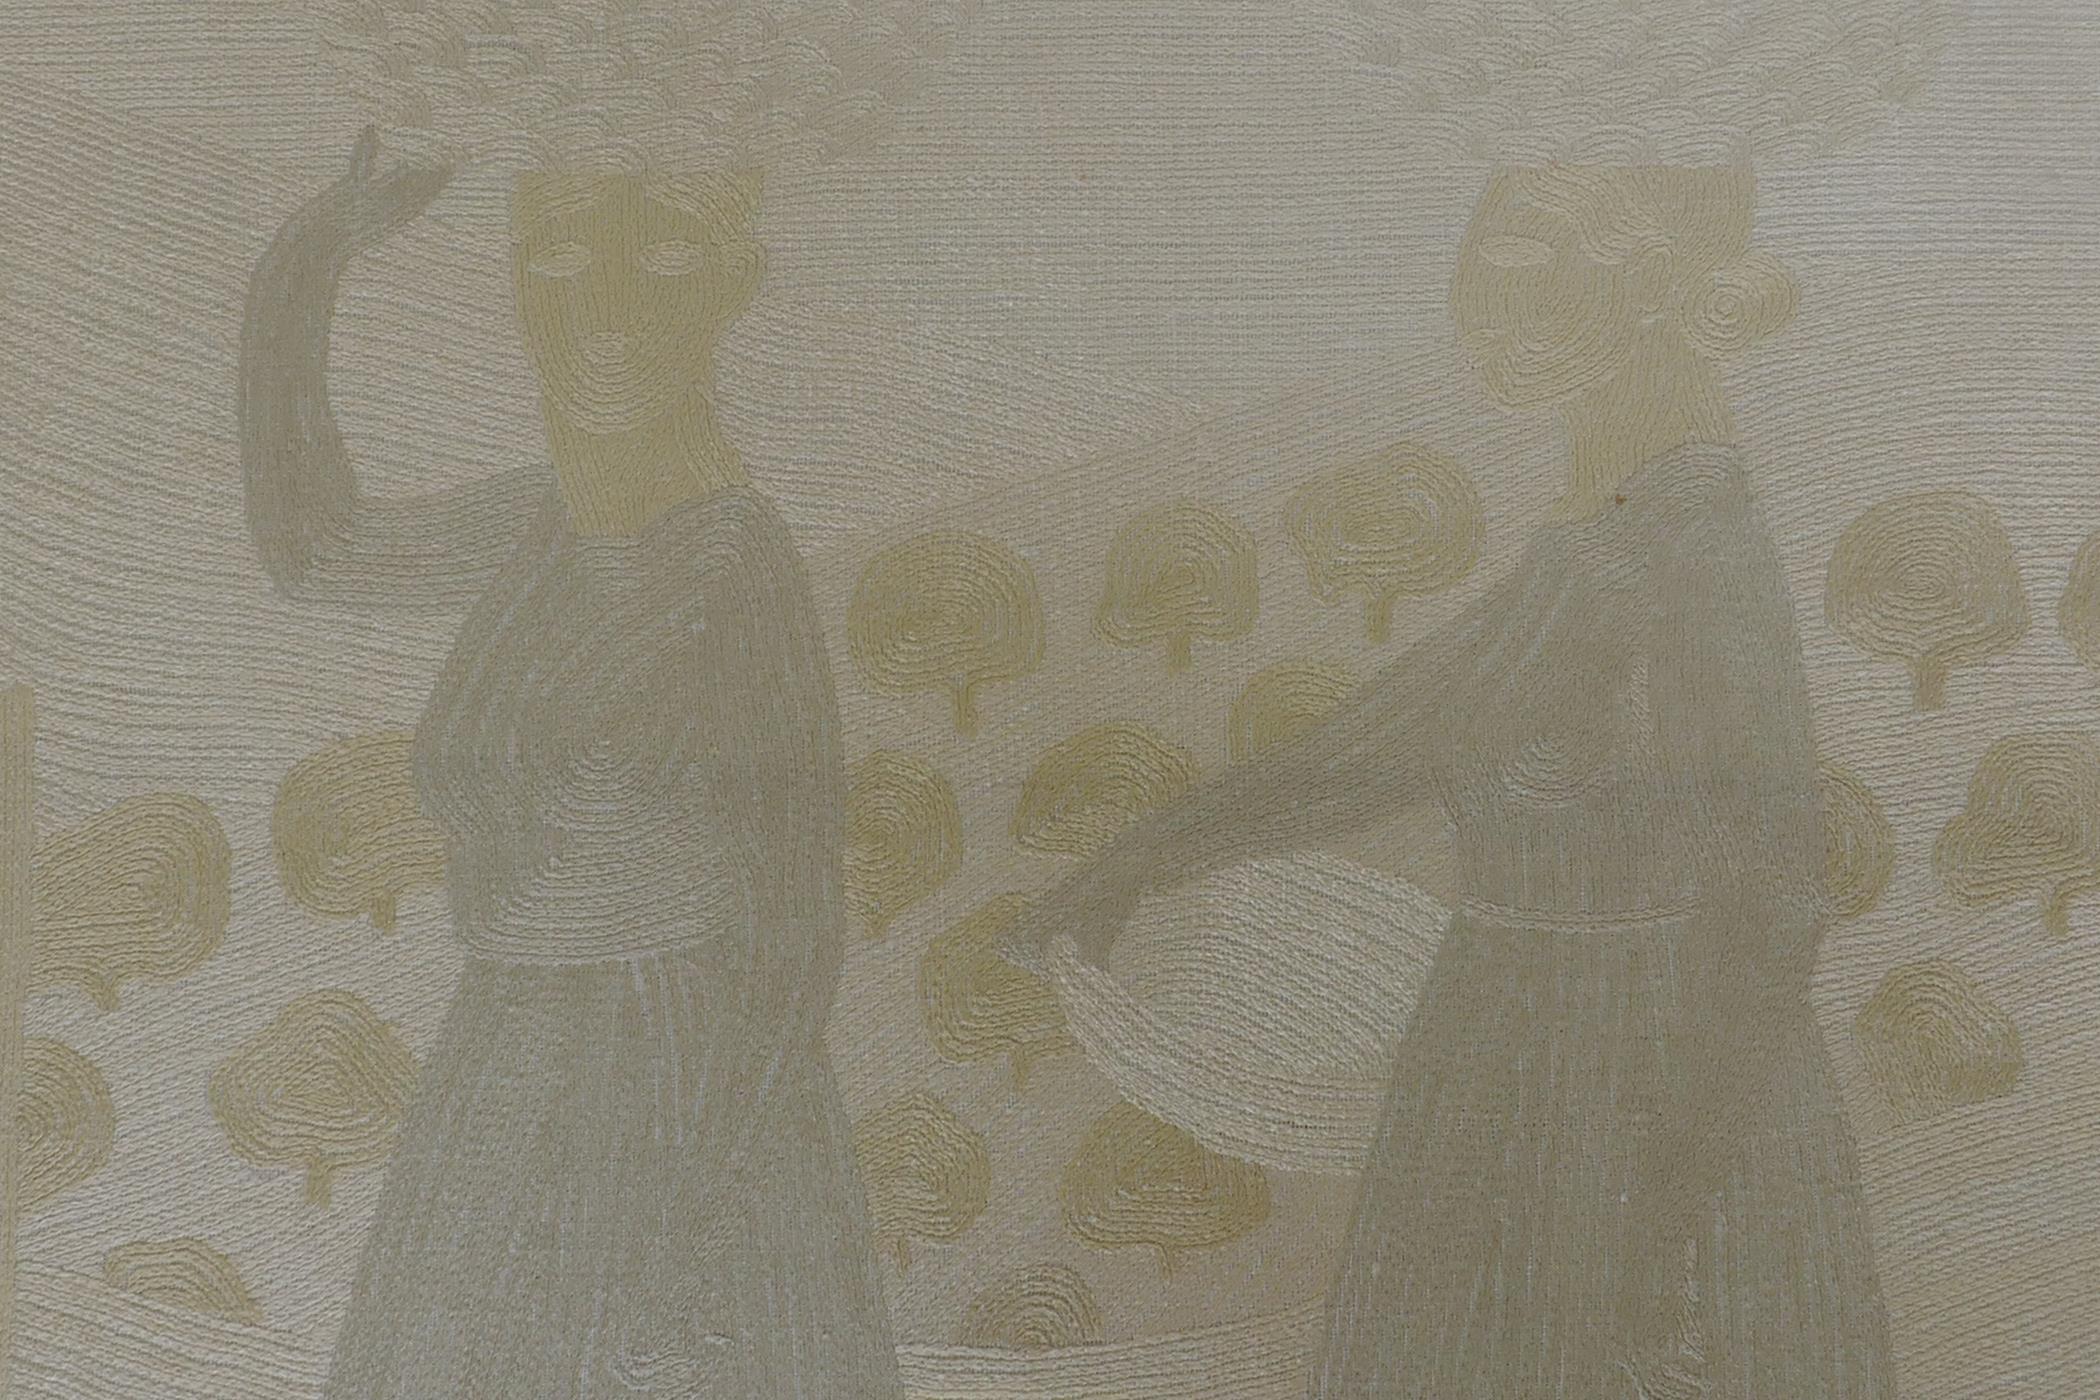 A fine silkwork embroidery, washer women at a fountain, first half of C20th?, 62 x 68cm - Image 4 of 5